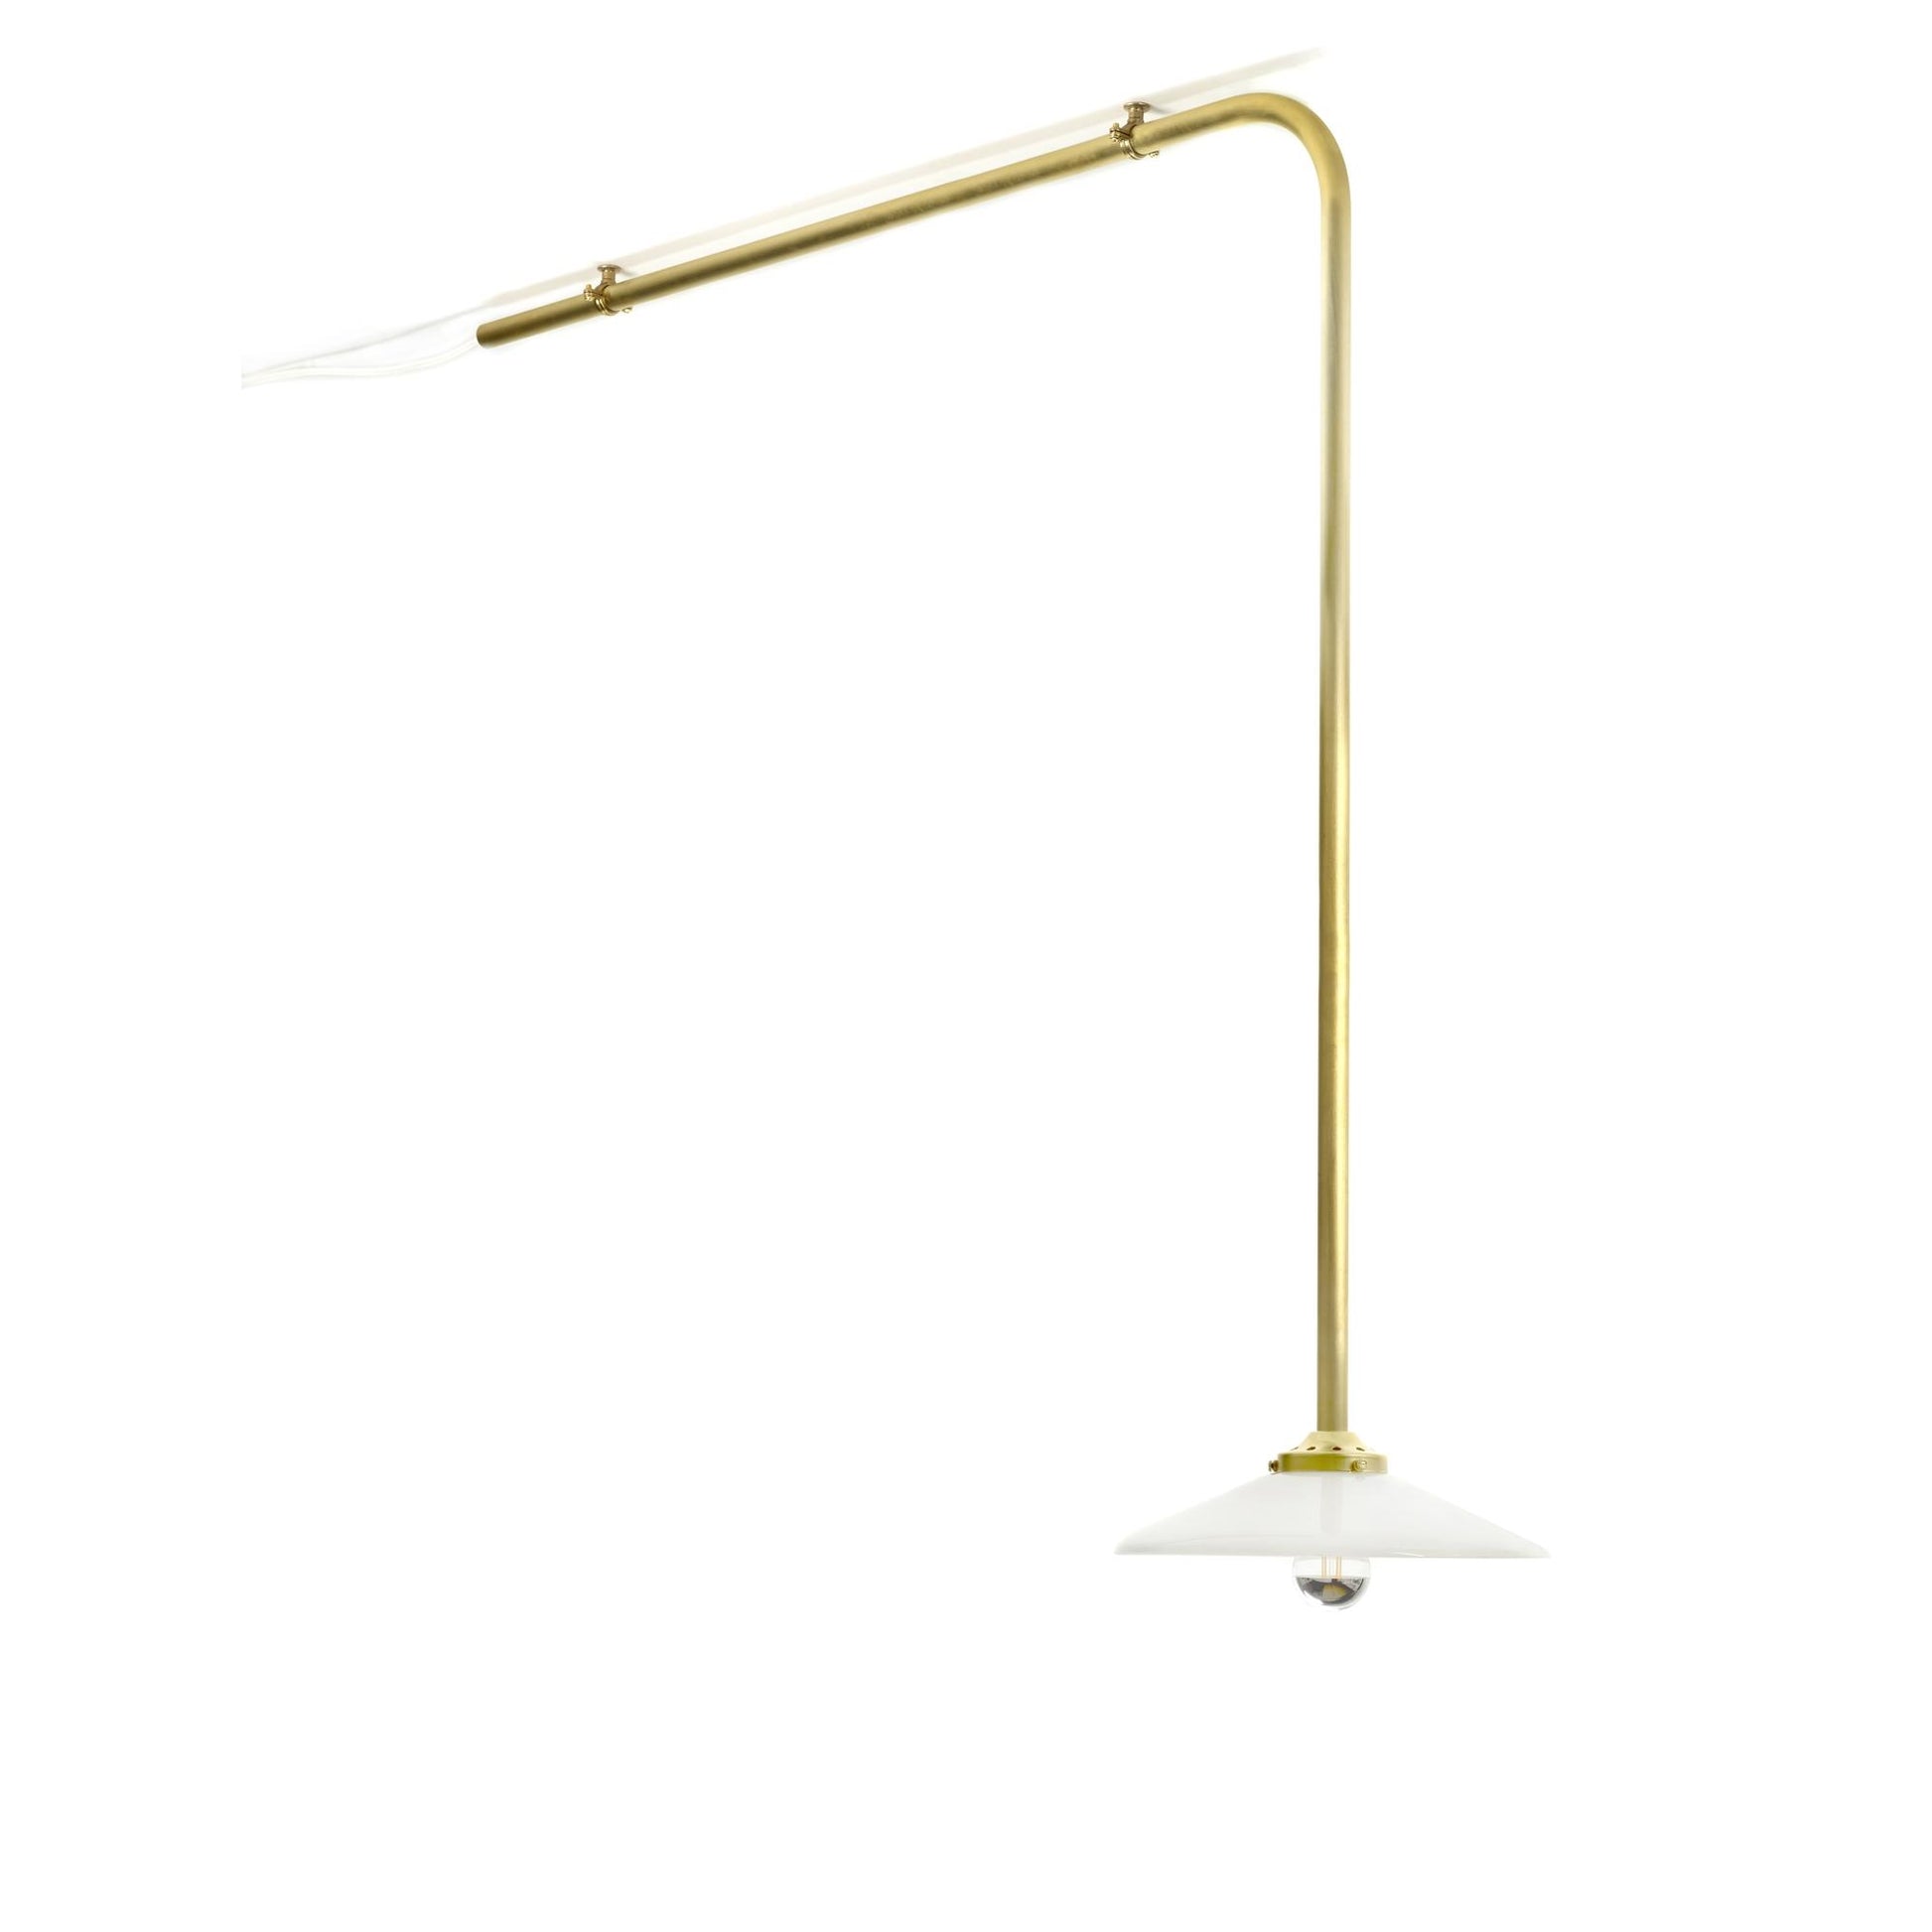 Ceiling Lamp N°1 Ceiling Light by Valerie Objects #Brass